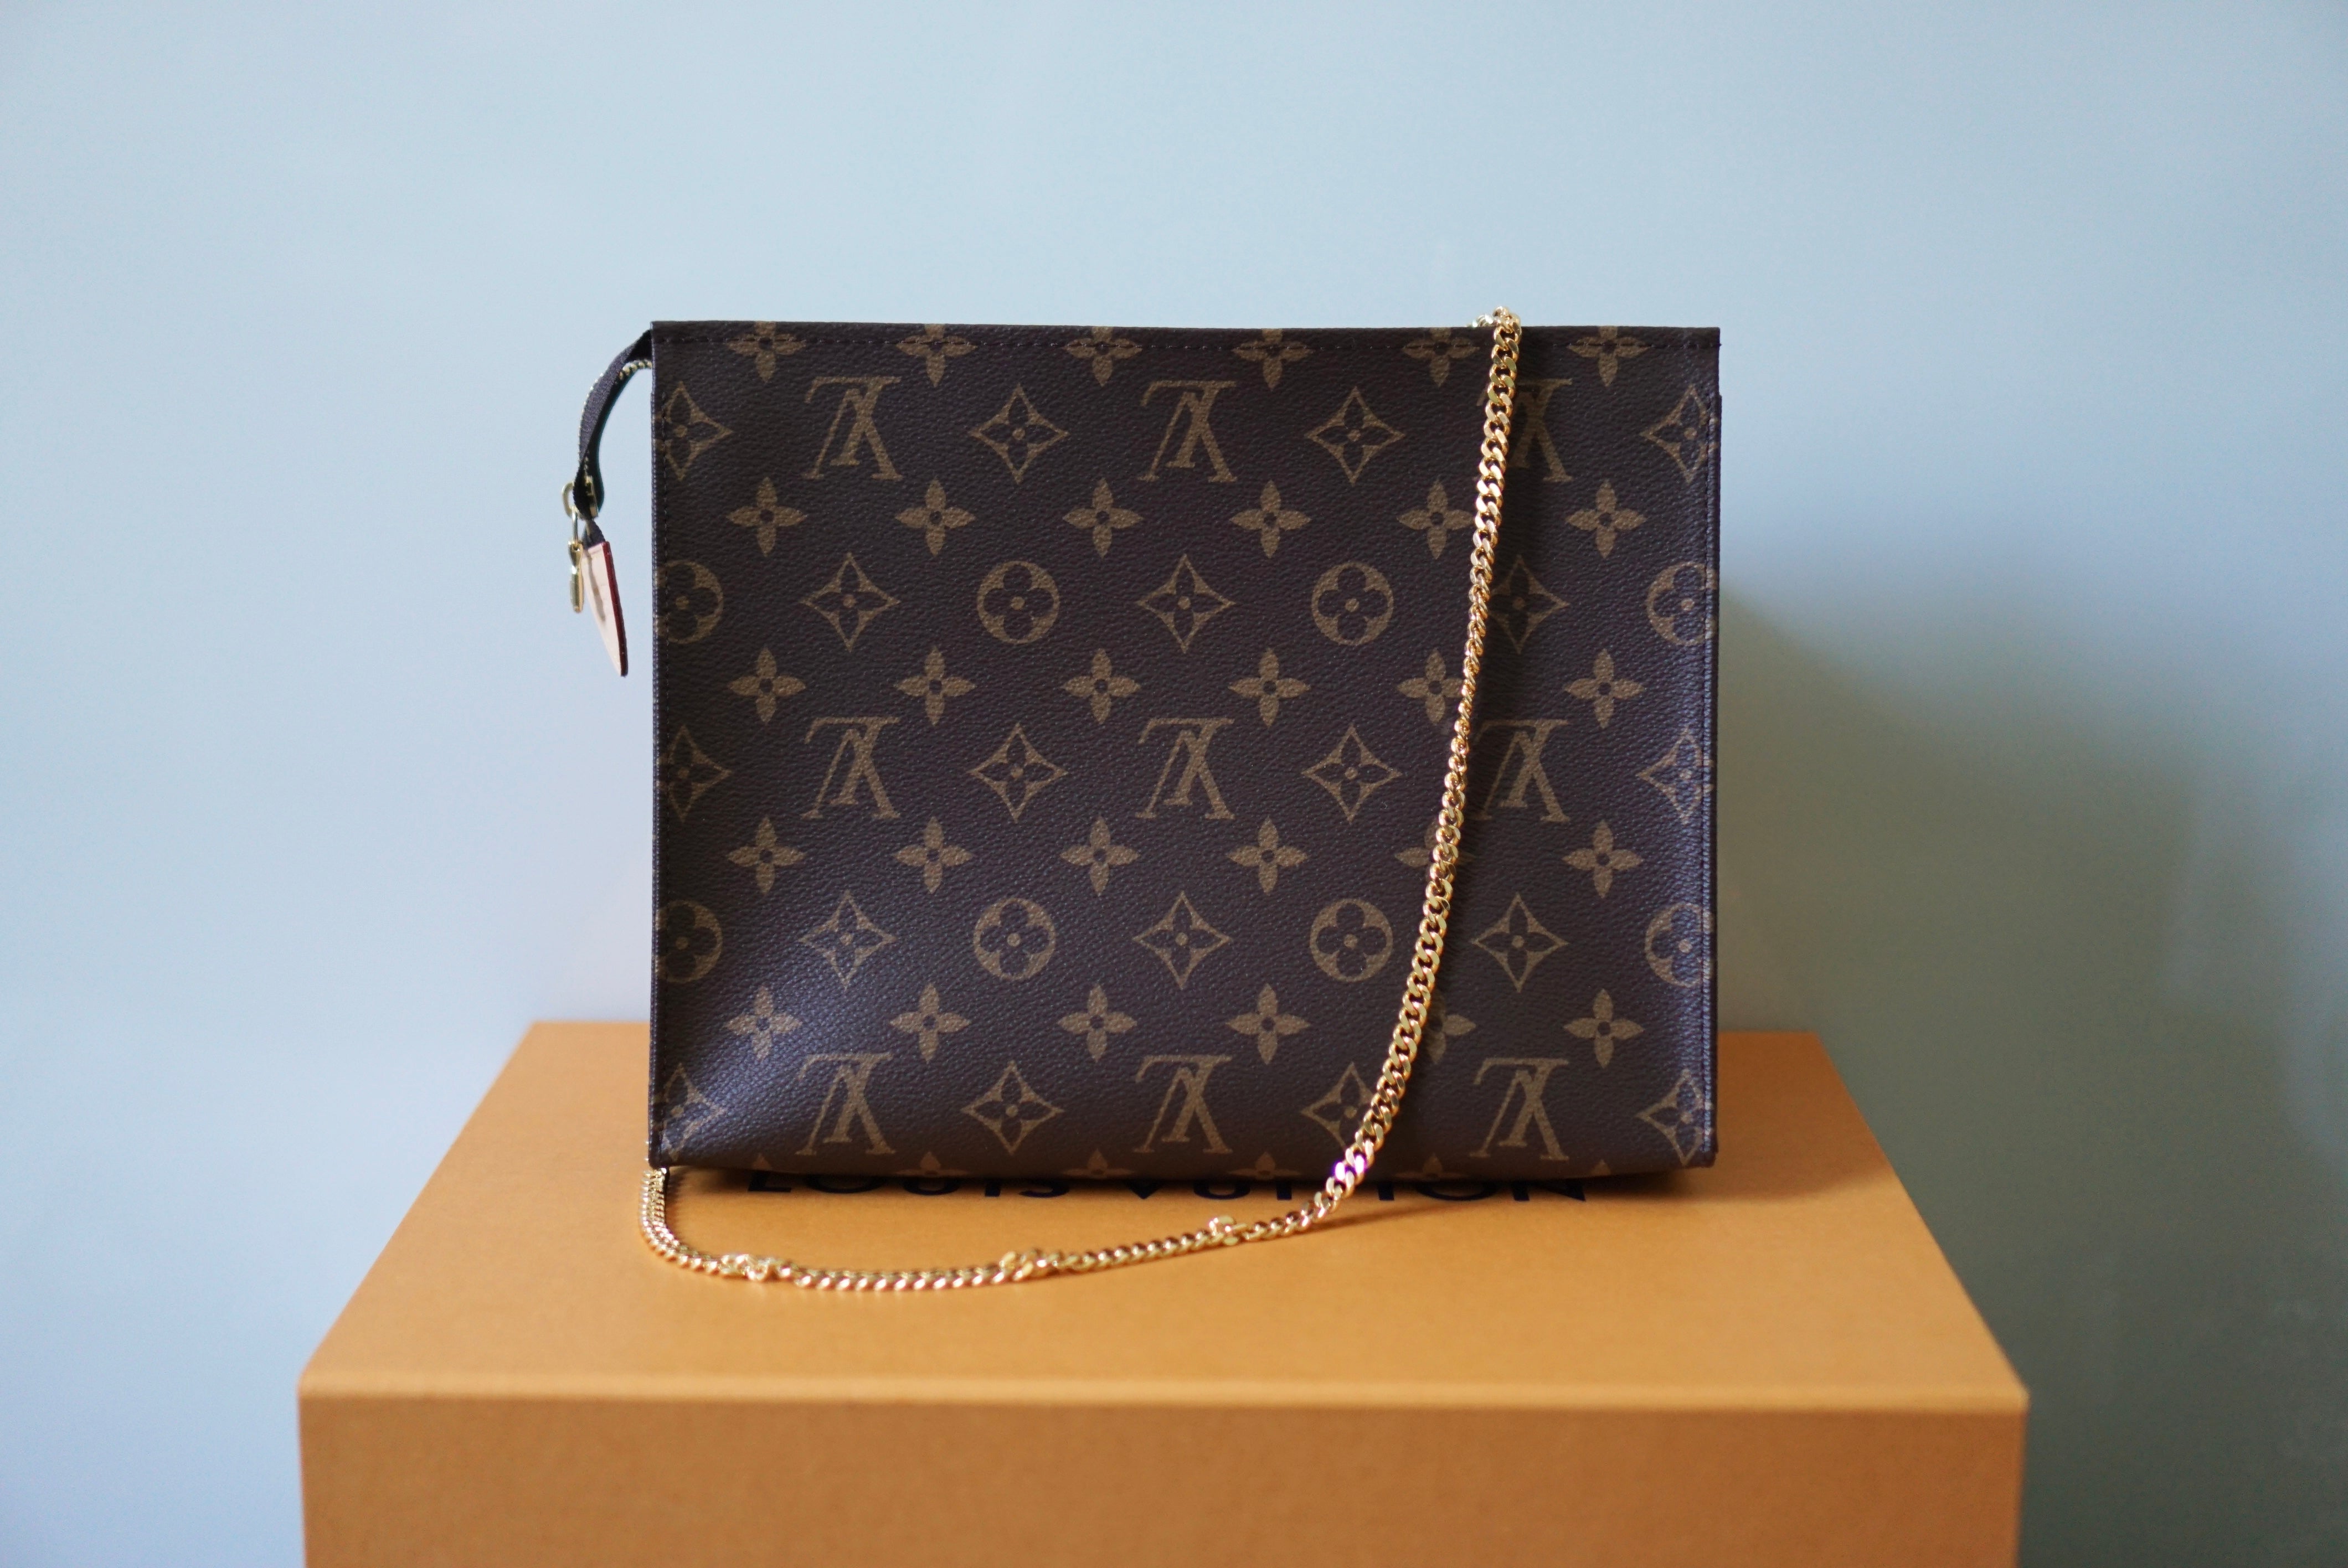 How to turn the Louis Vuitton Toiletry Pouch 26 into a Cross Body Bag with  this AMAZING Kit! 